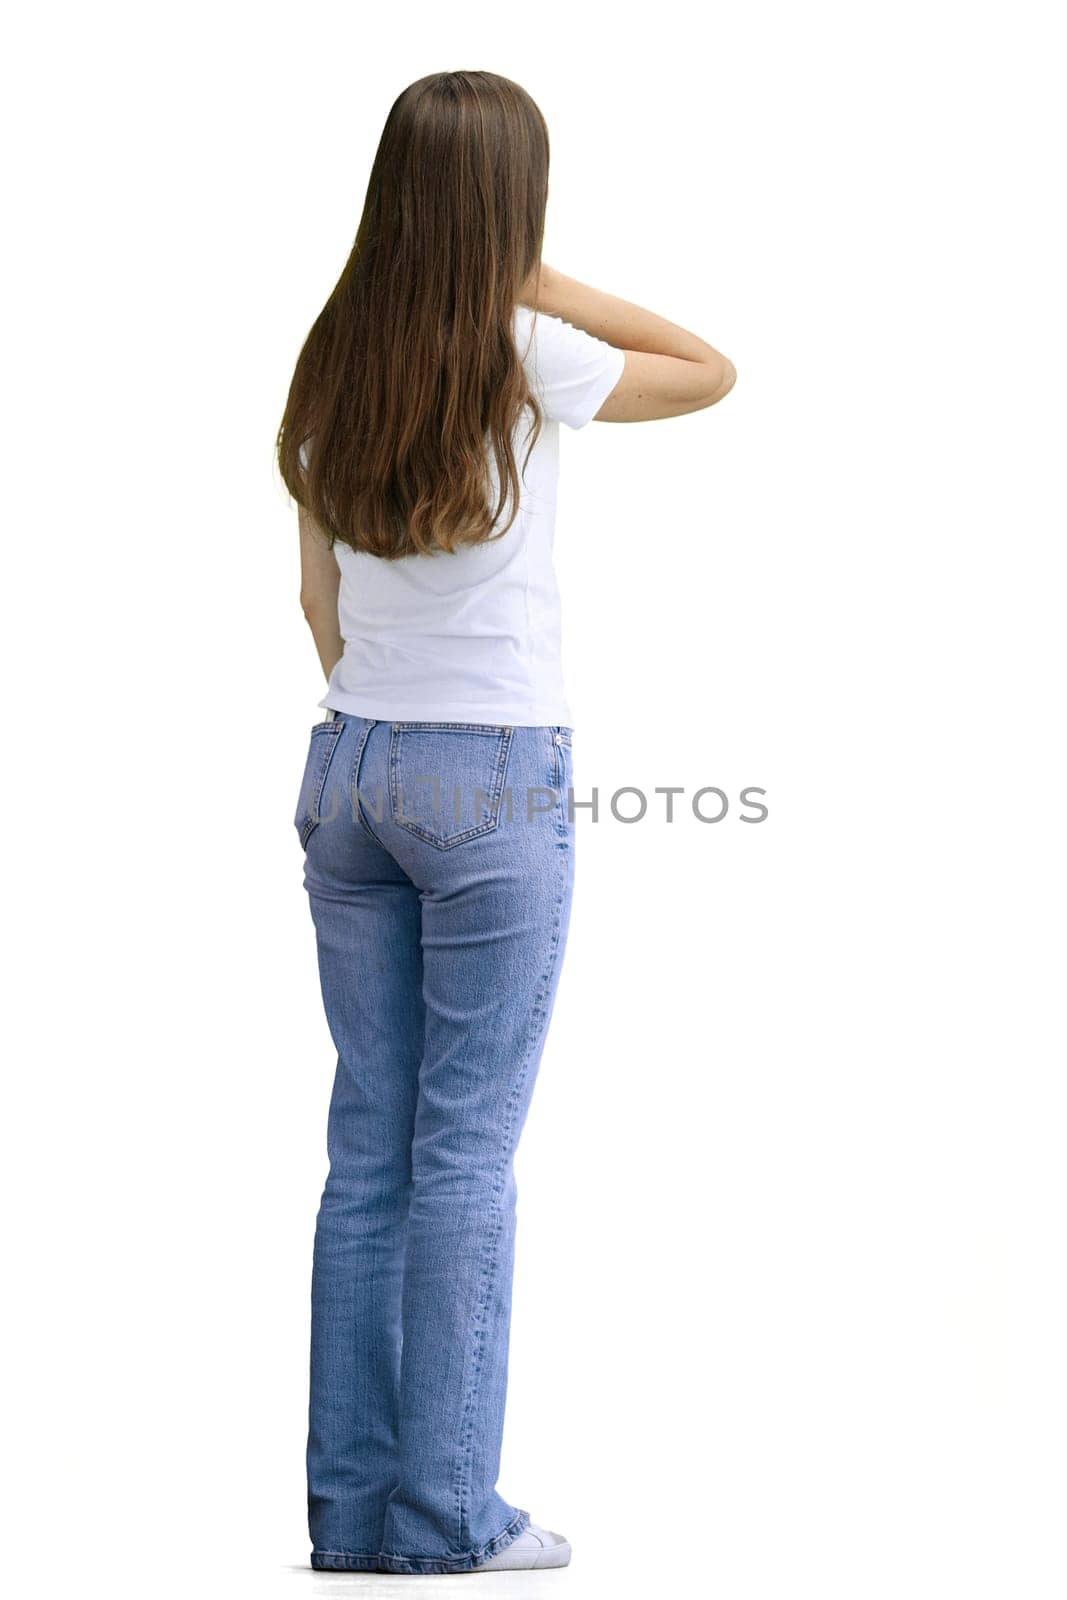 A woman, full-length, on a white background, tired by Prosto